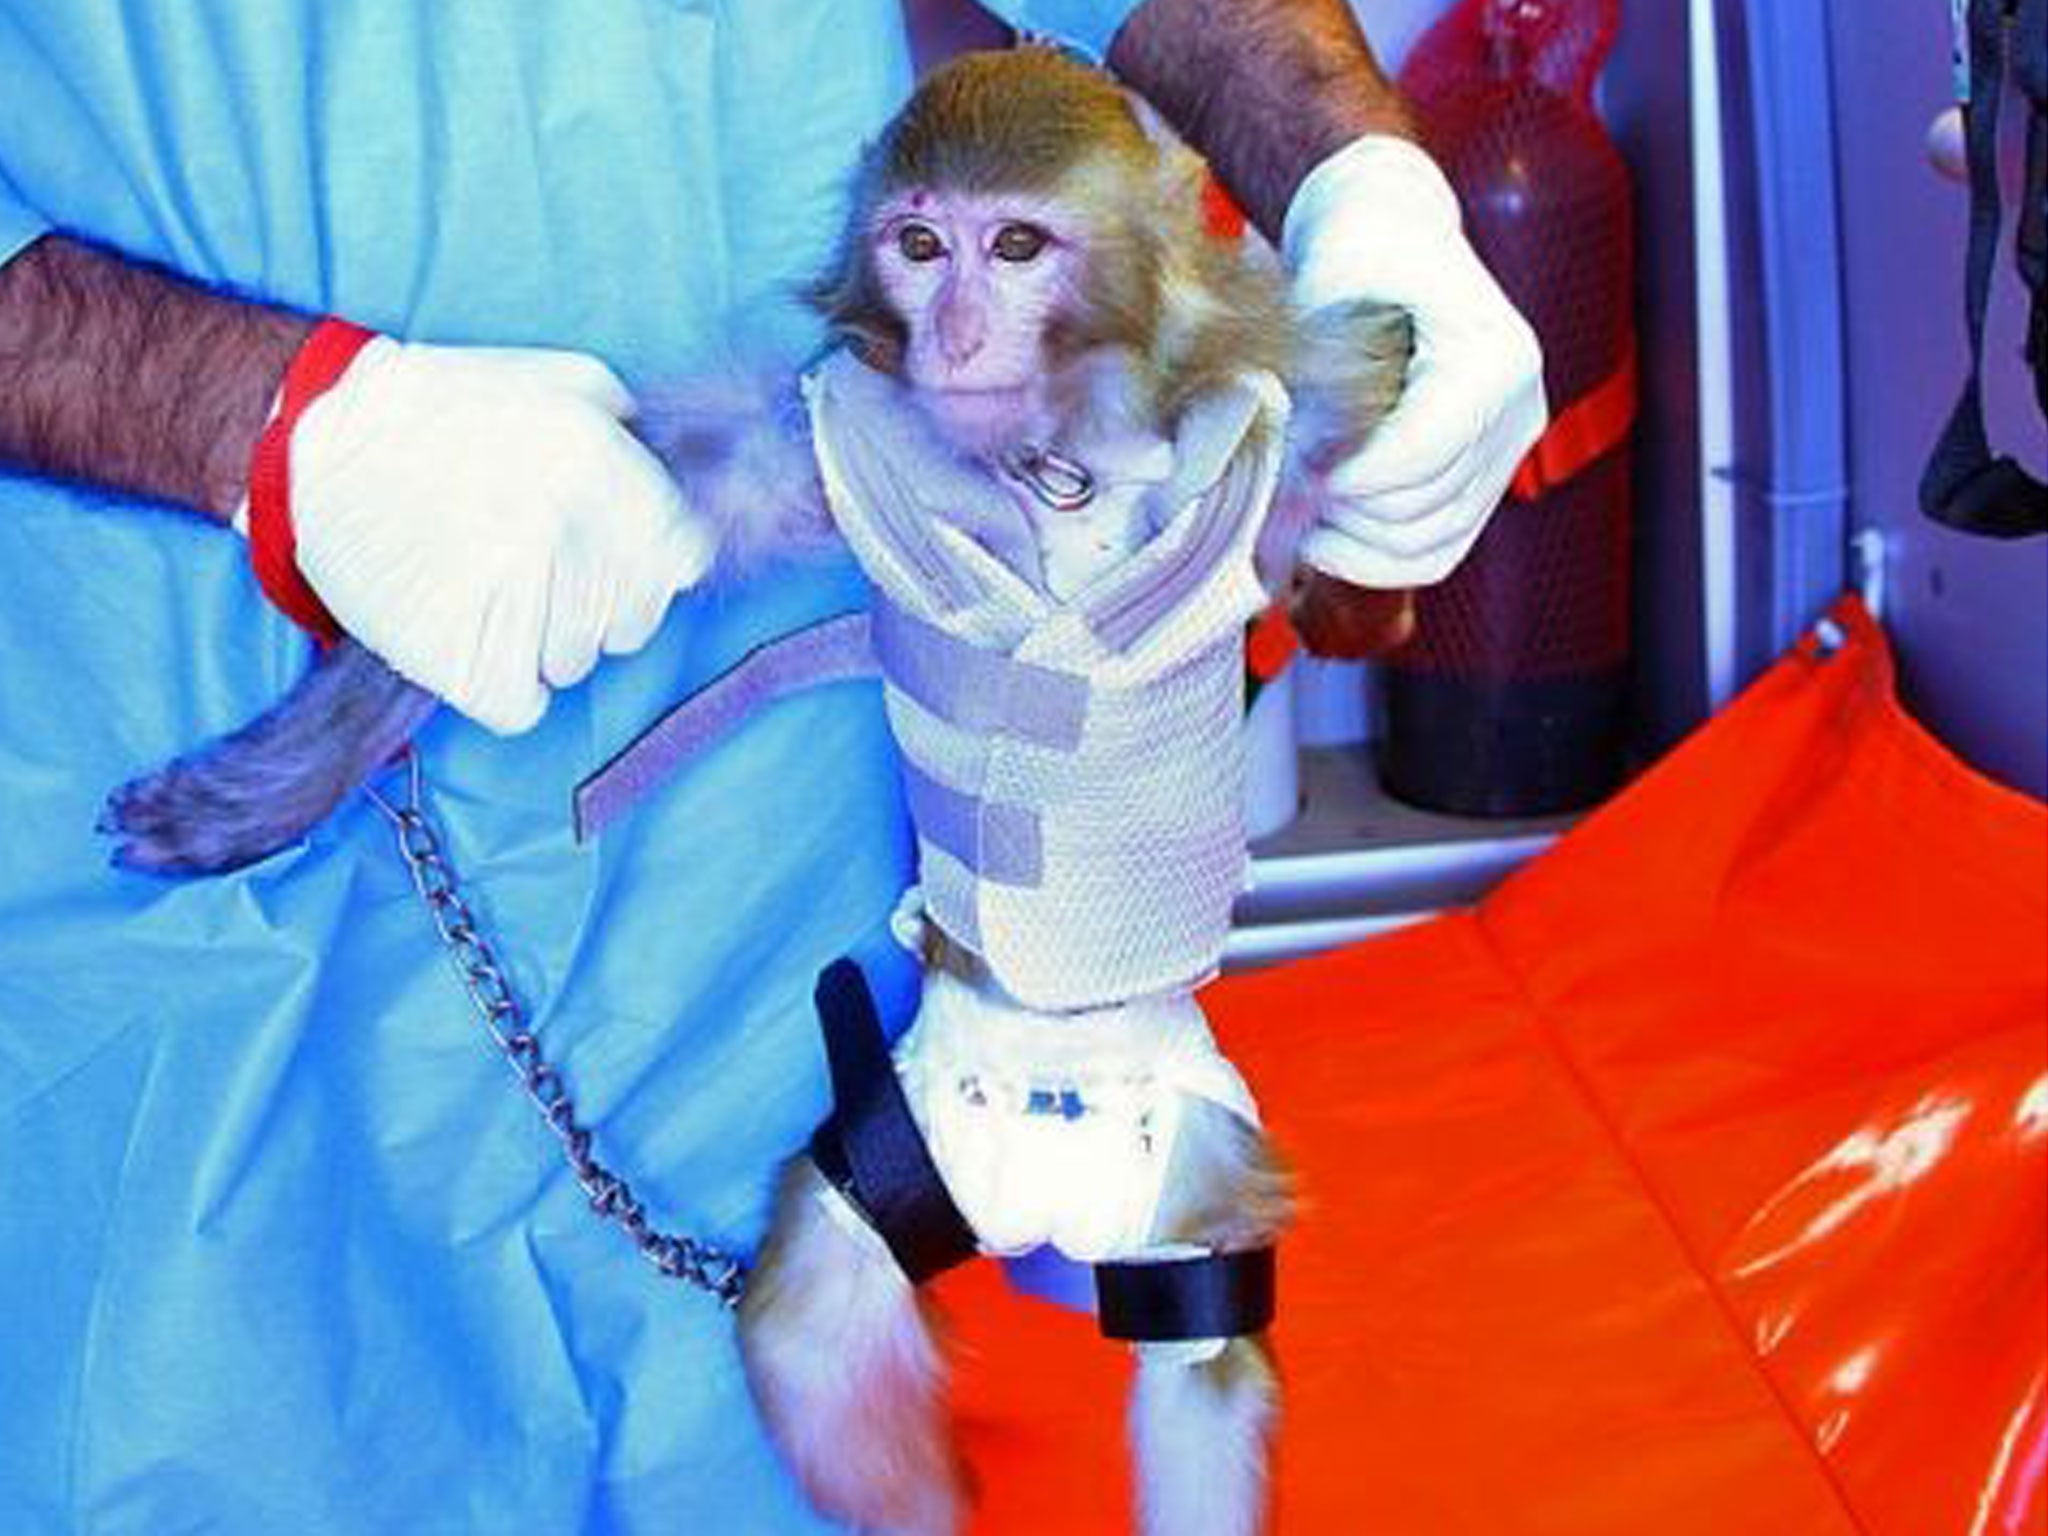 Iran took a "big step" towards sending astronauts into space by 2020, successfully launching a monkey above the Earth's atmosphere, Defence Minister Ahmad Vahidi told state television earlier this year. They are now claiming a second monkey has been succe